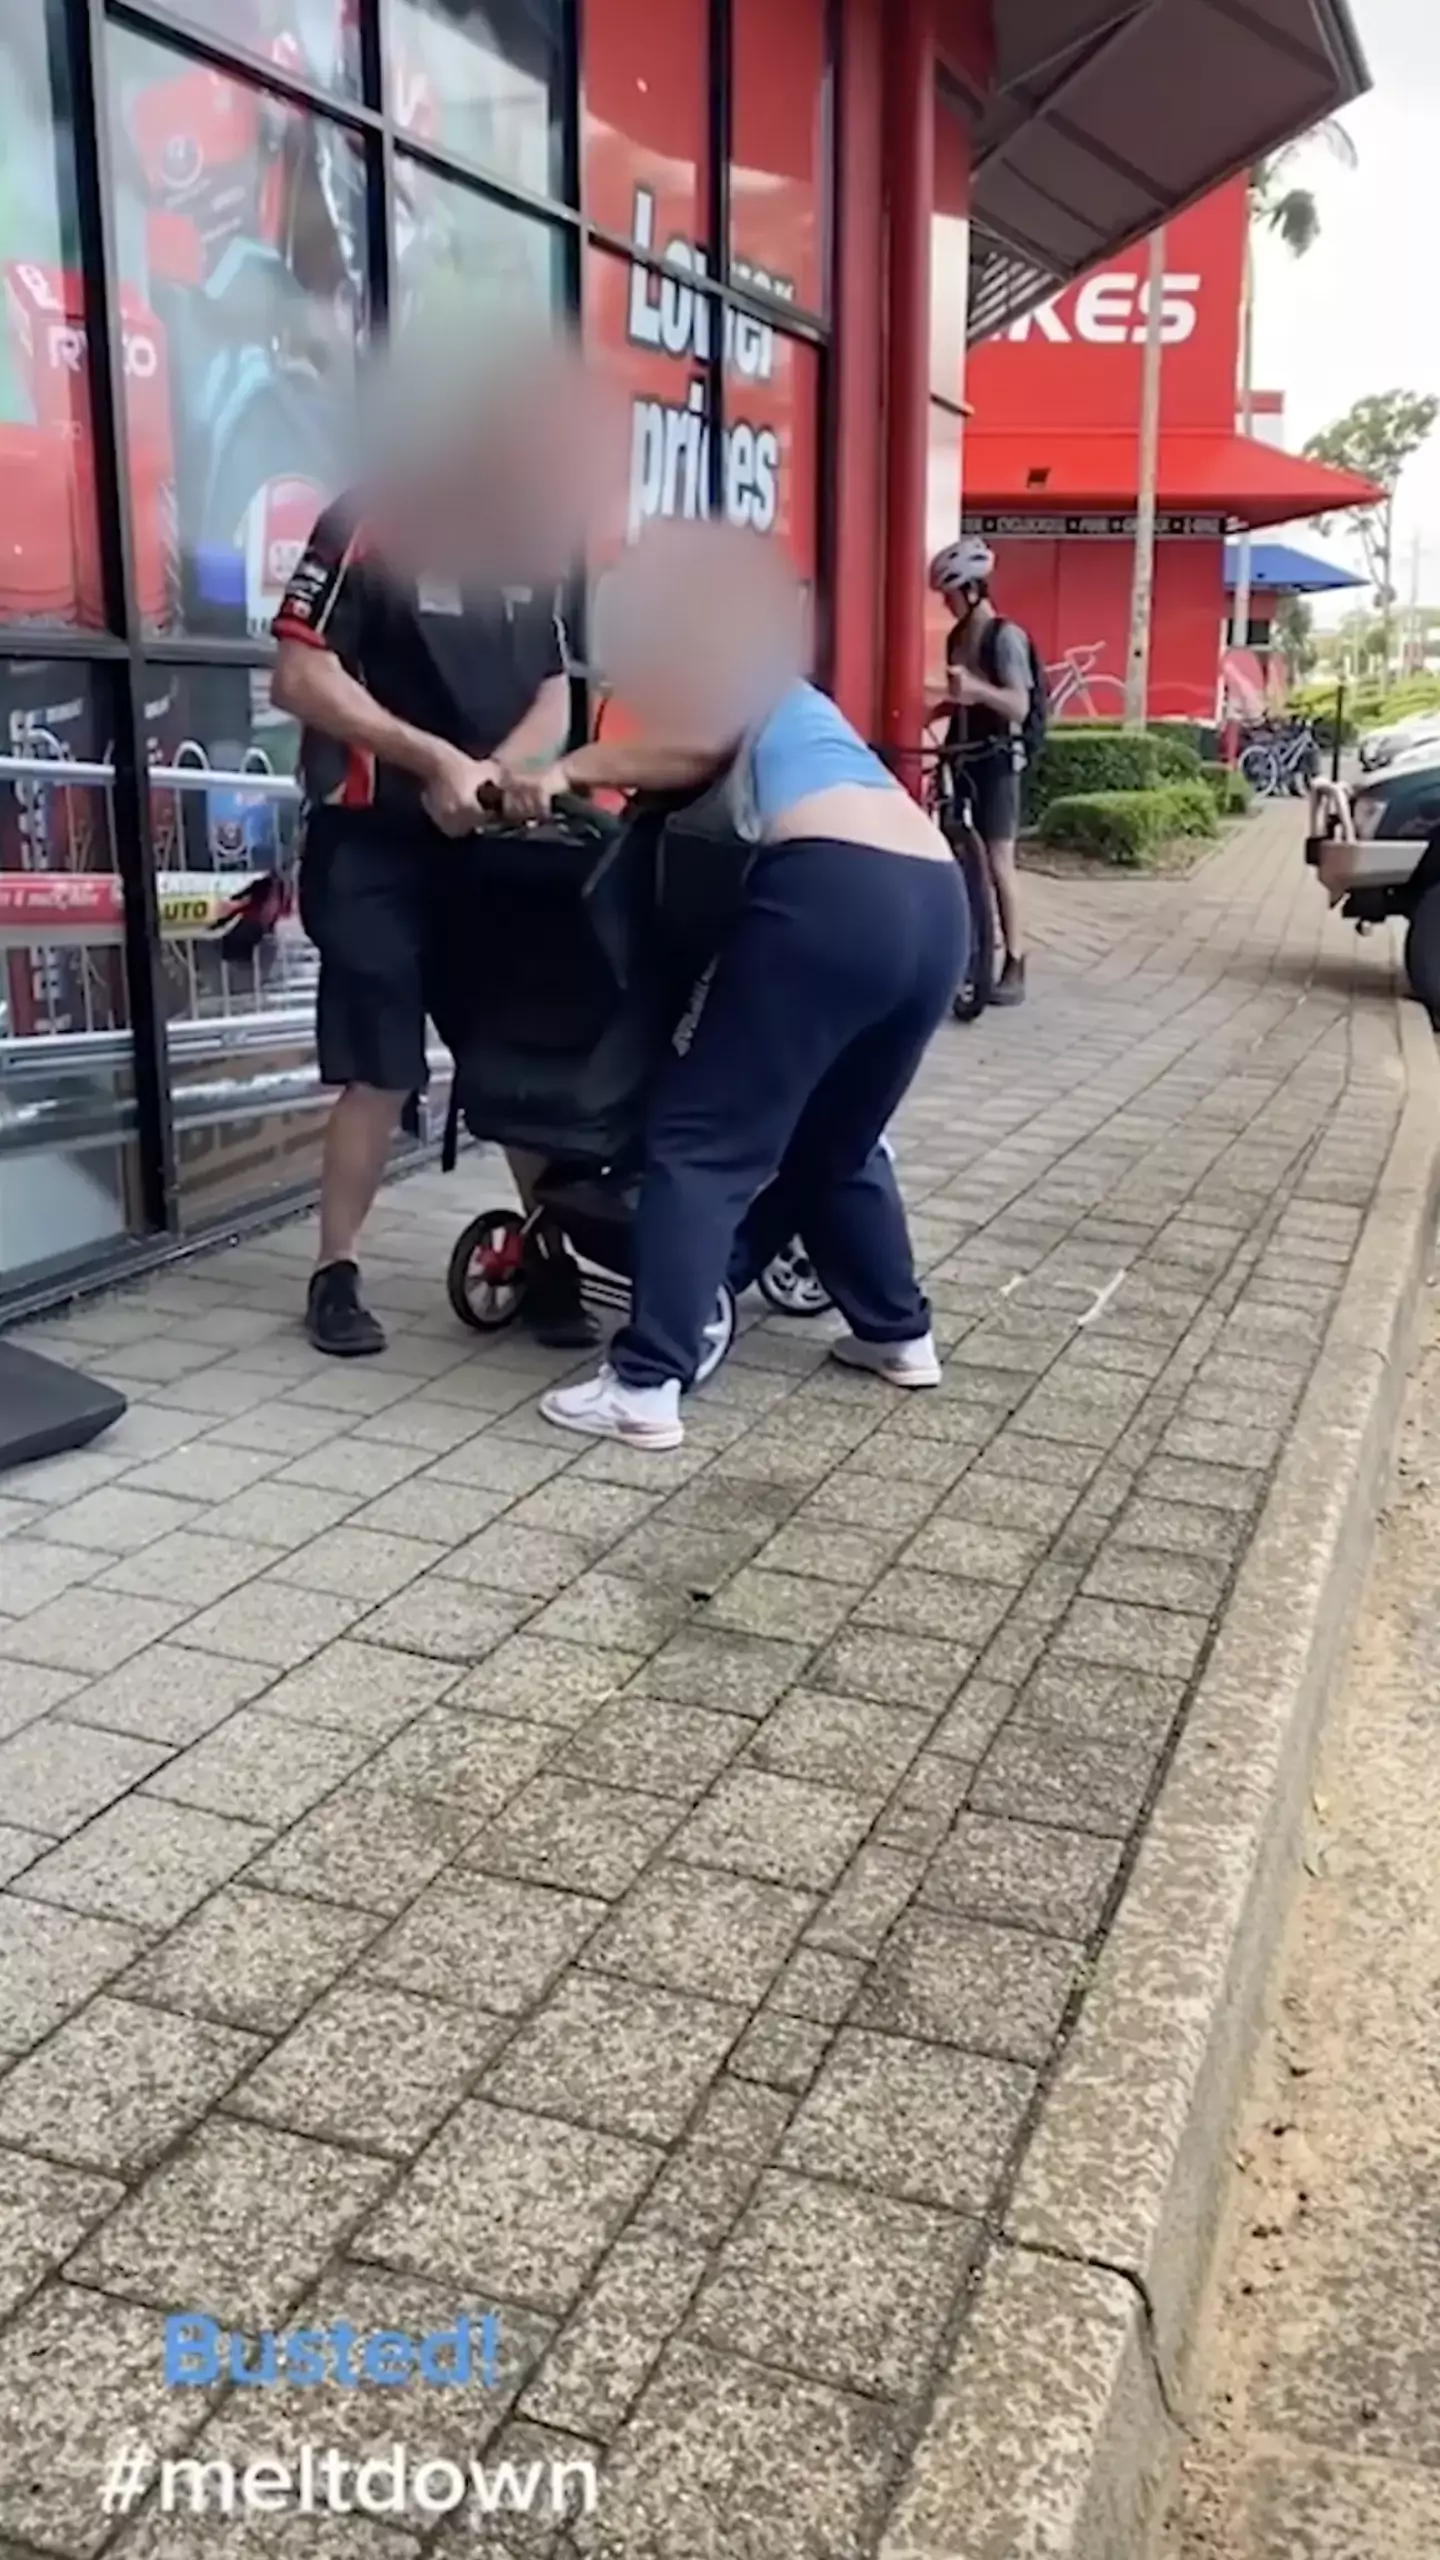 The employee was filmed confronting a 'thief' who had loaded up a pram with stolen goods.